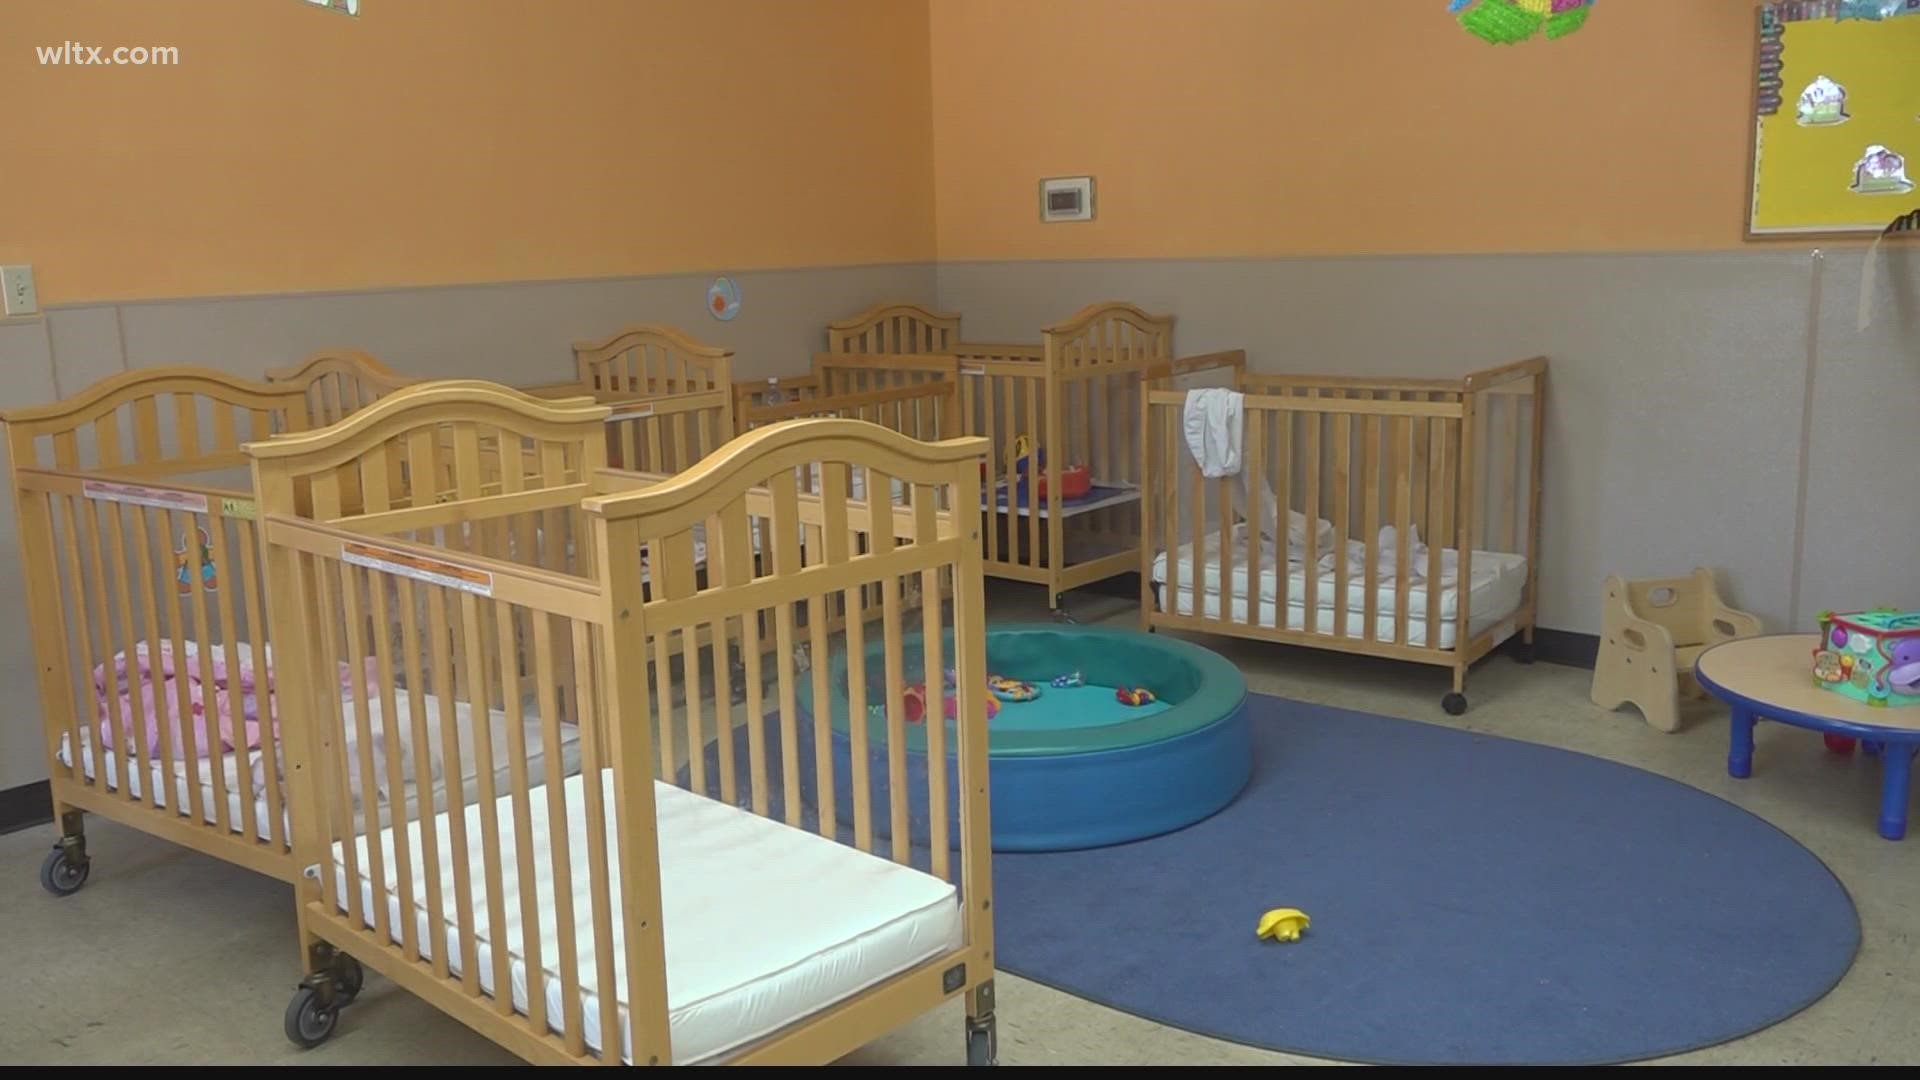 Many parents who haven't found daycare may struggle to find it.   Waitlists are in place at most centers.